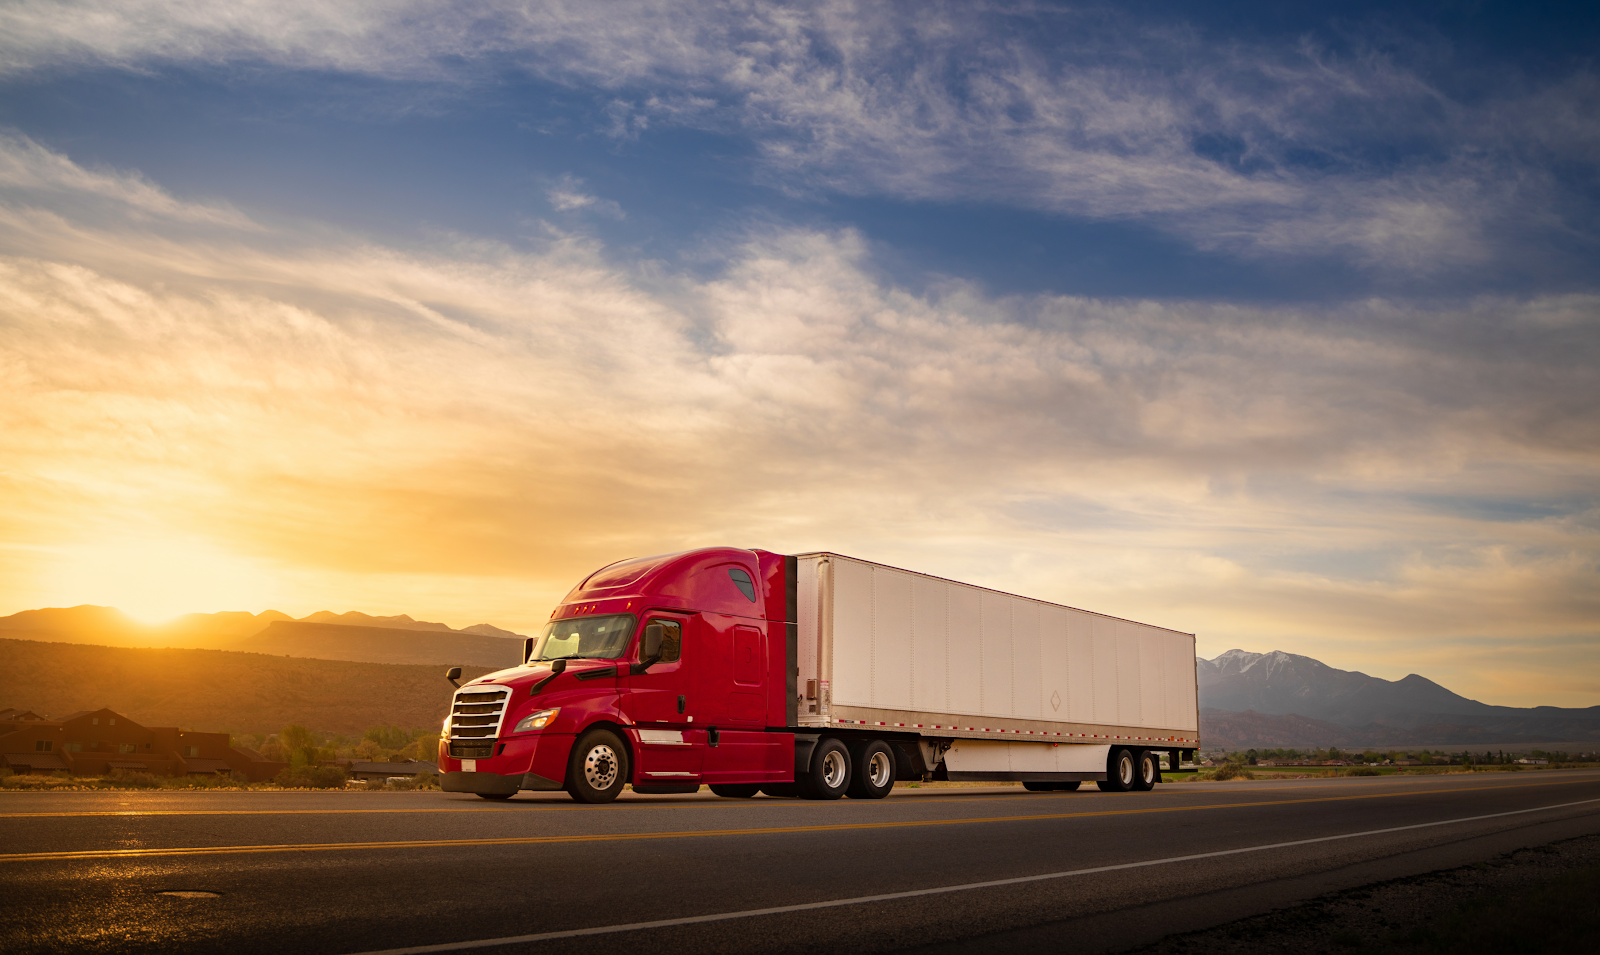 red 18 wheeler truck driving on a highway at sunset, highway safety theme